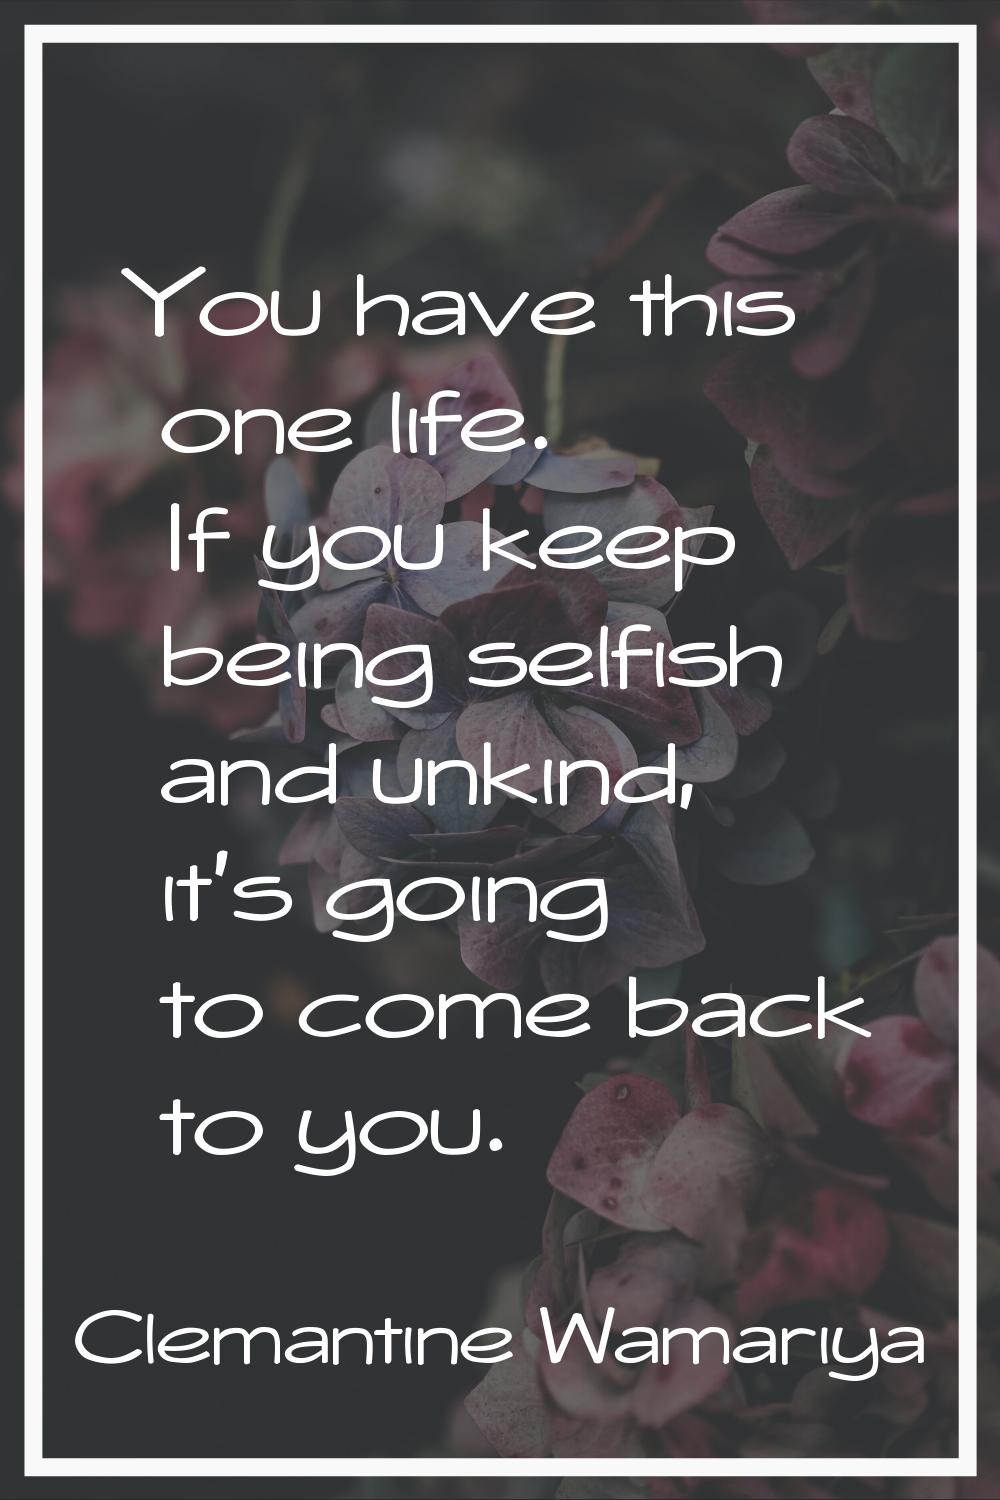 You have this one life. If you keep being selfish and unkind, it's going to come back to you.